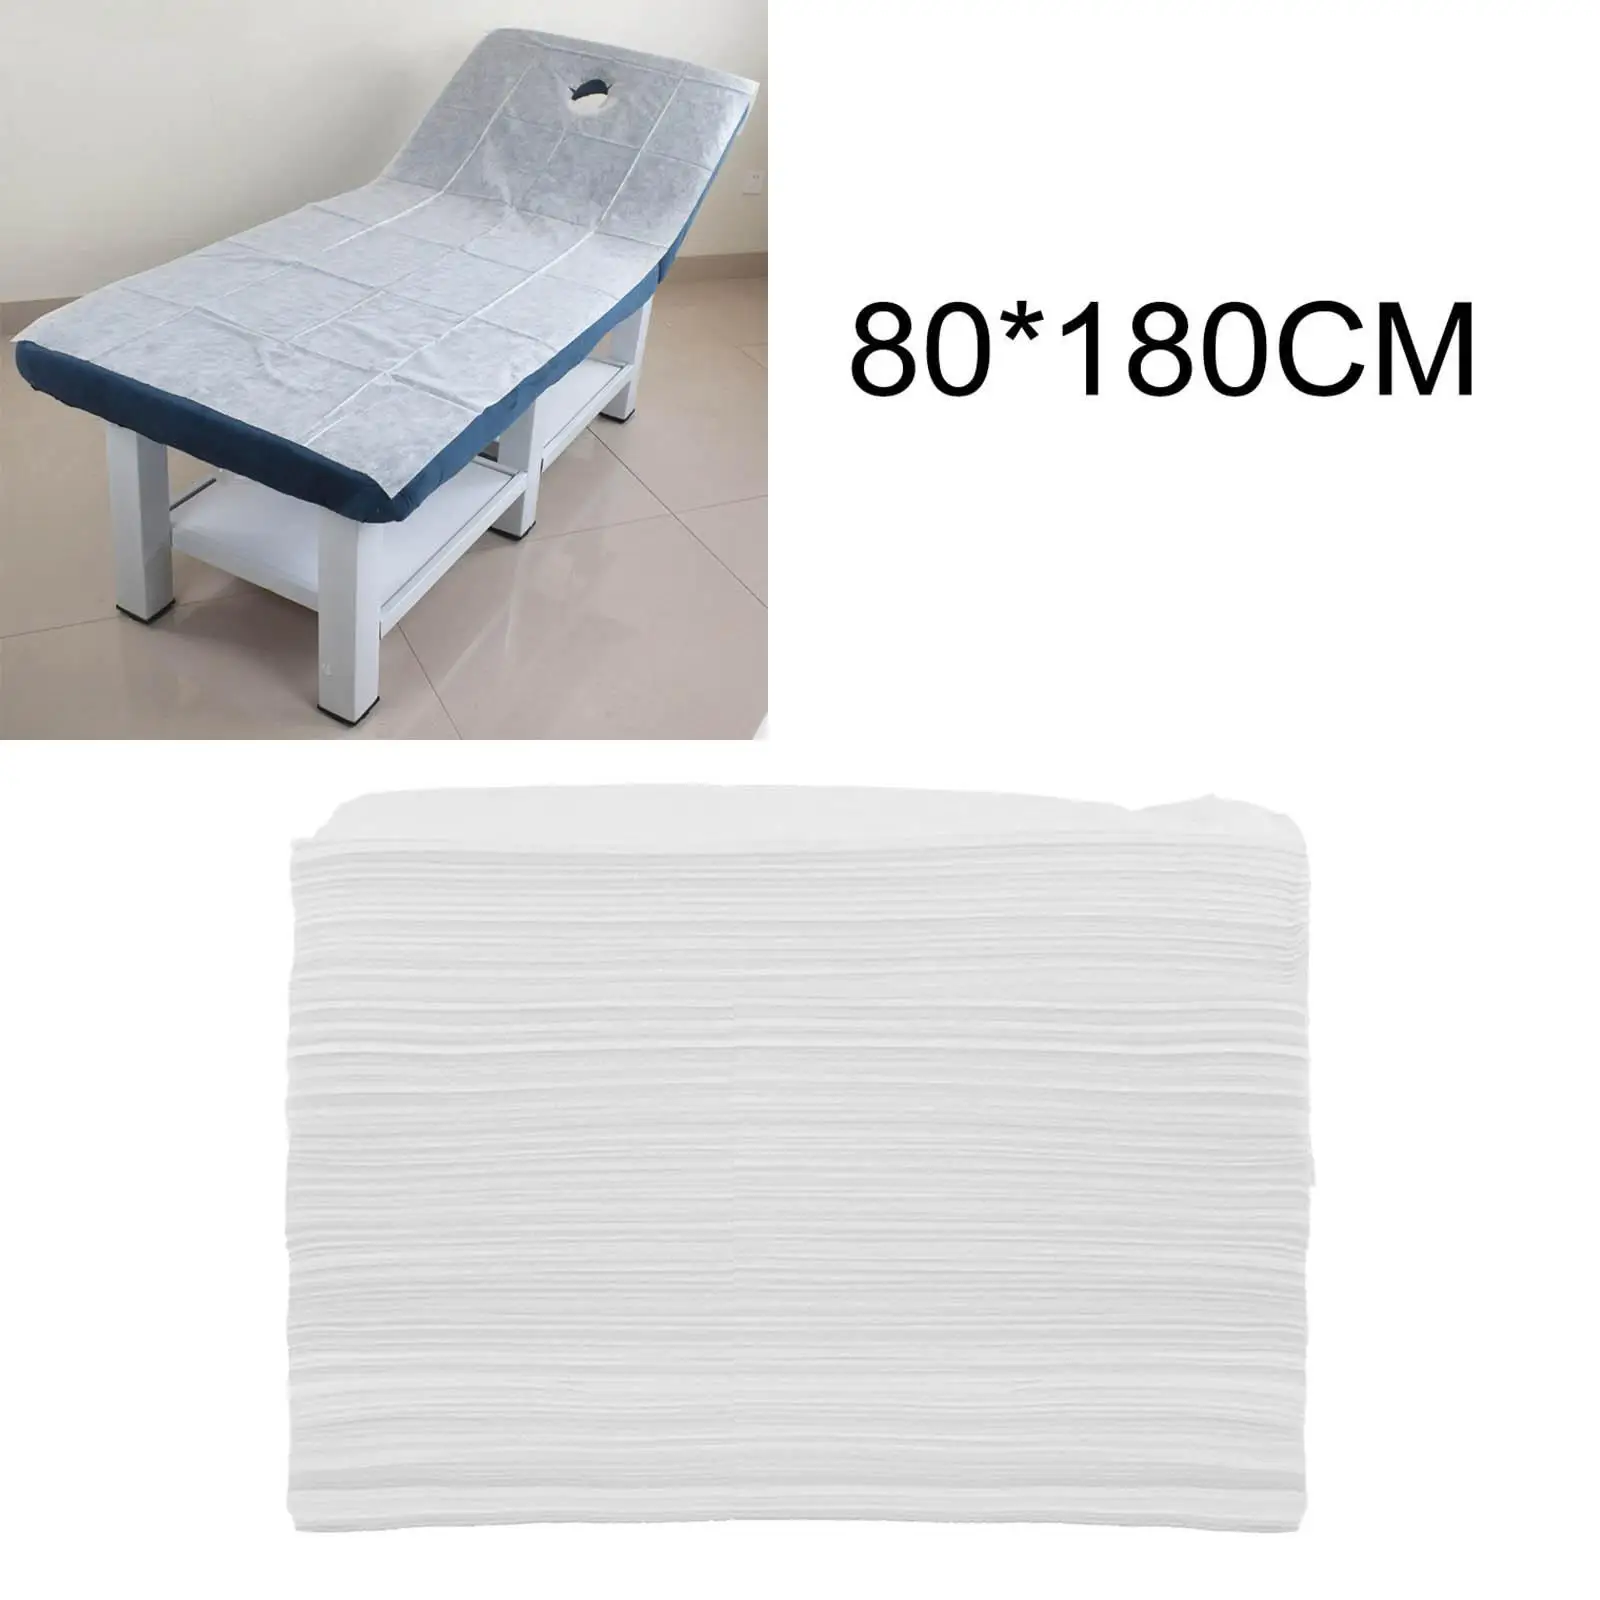 100x Disposable Bed Sheet Thicken 80x180cm Soft Massage Bed Cover for Beauty Salon SPA Travel Hotel Stretcher Table Cover